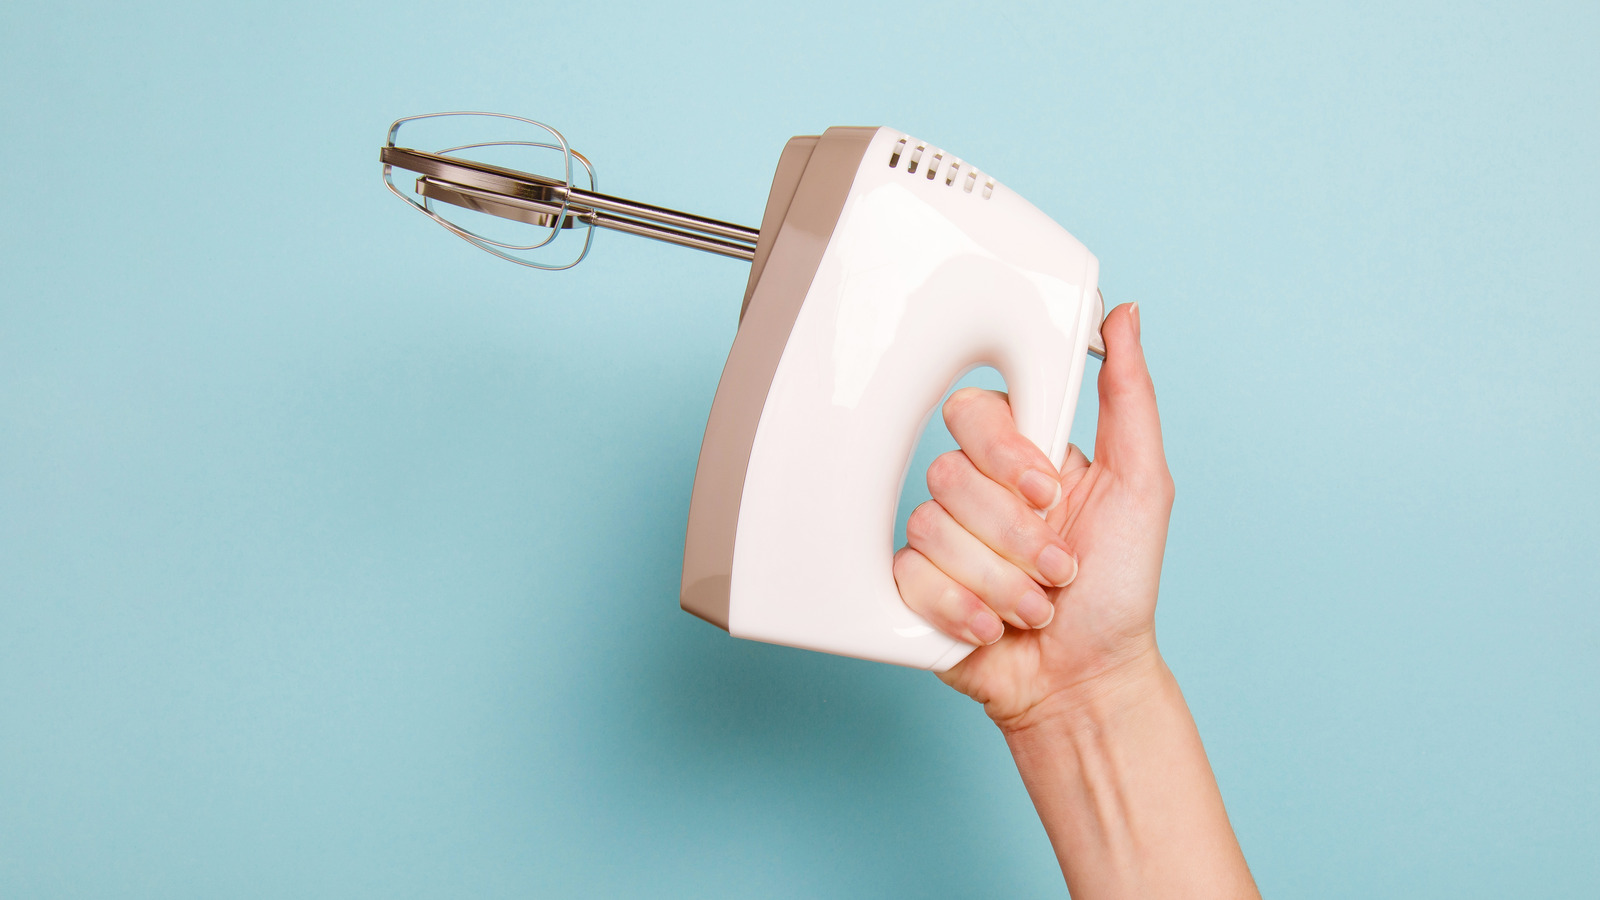 A Reliable Electric Hand Mixer Is a Must-Have Appliance, and This